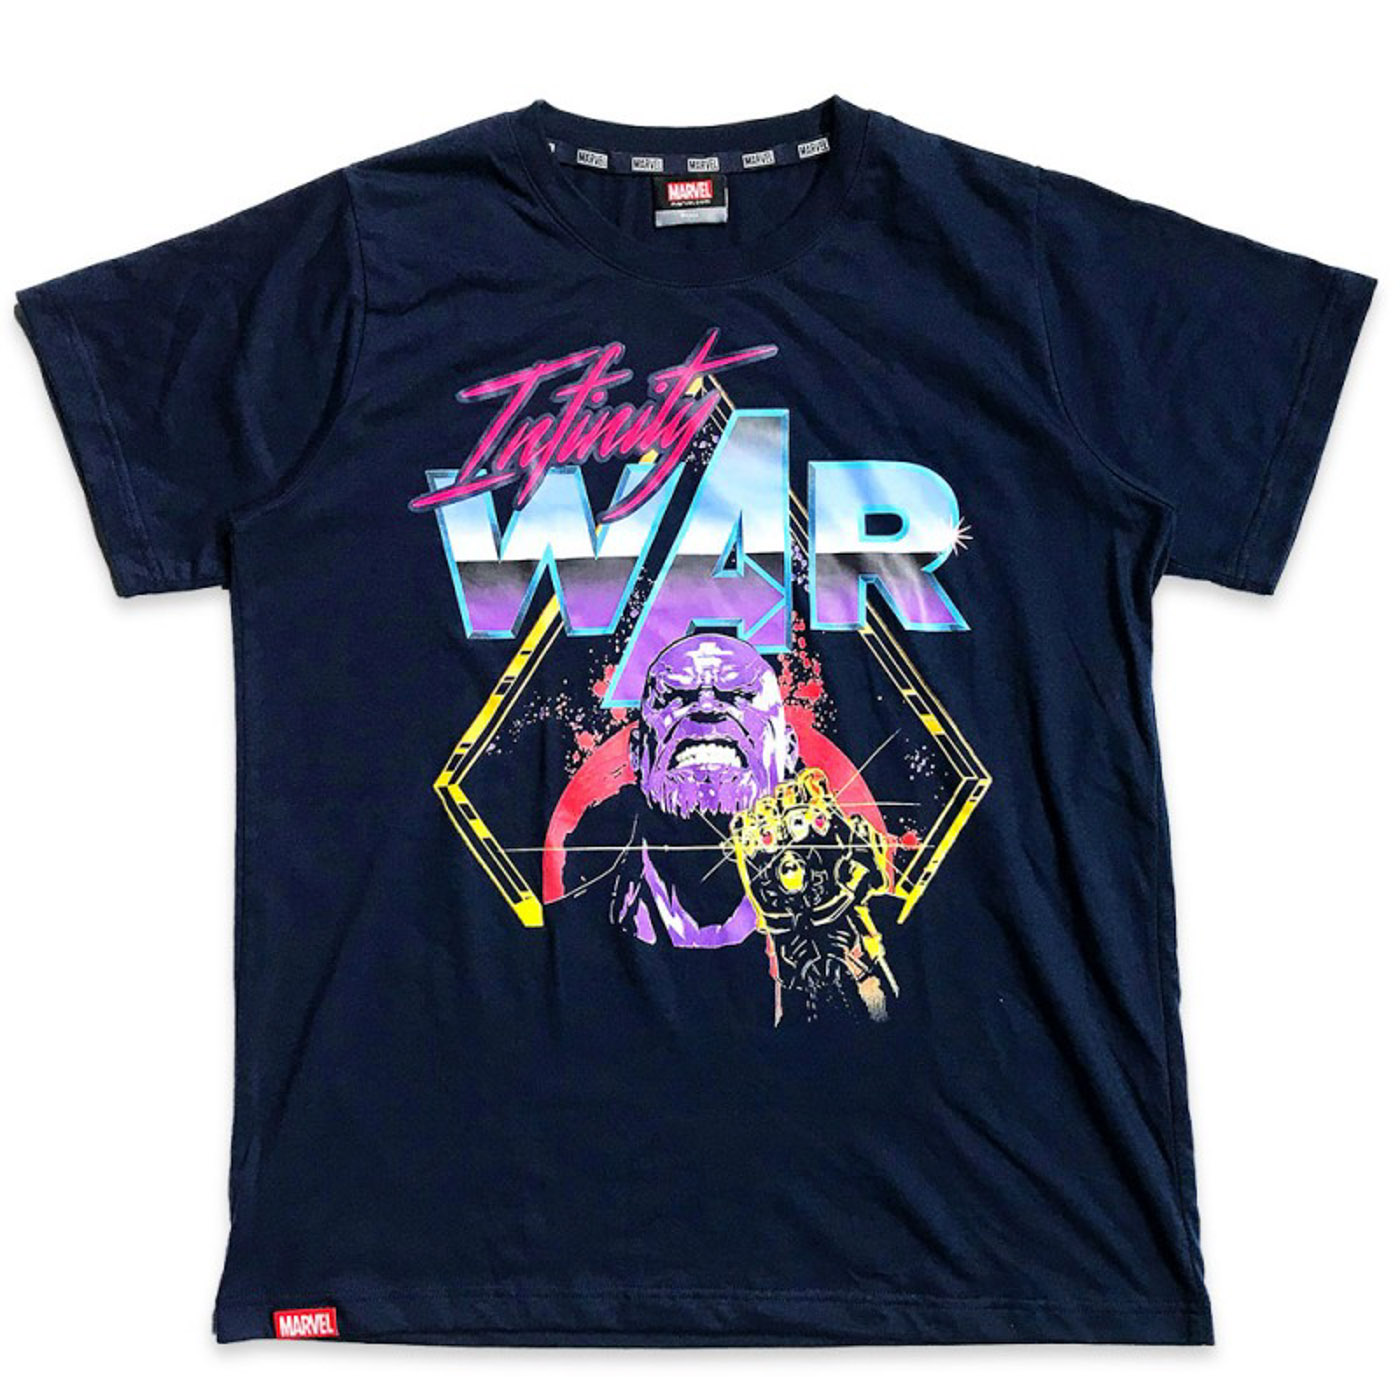 AVENGERS: IFINITY WAR GRAPHIC TEE. Globe Lifestyle Marvel Apparel, 595 at https://shop.globe.com.ph/products/apparel. Photo courtesy of The Walt Disney Company (Philippines), Inc. 